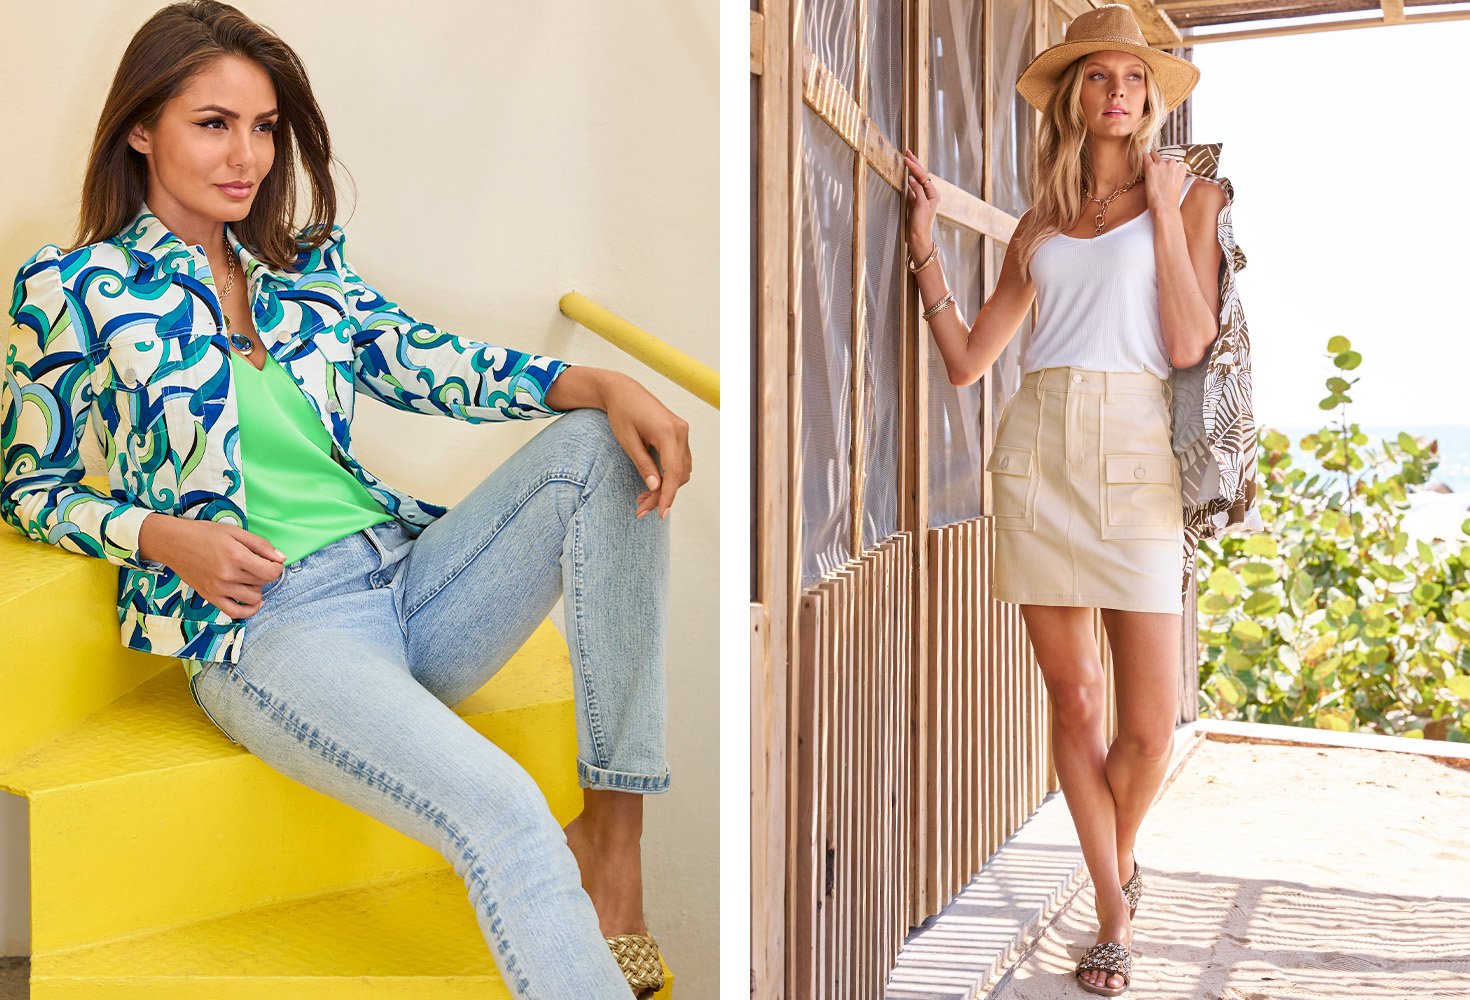 Left model wearing a blue and green printed jacket, green v-neck charmeuse blouse, bleach washed jeans, and gold braided slides. Right model wearing a white tank top, tan cargo skirt, embellished slides, and straw hat while holding a white and brown printed utility jacket.